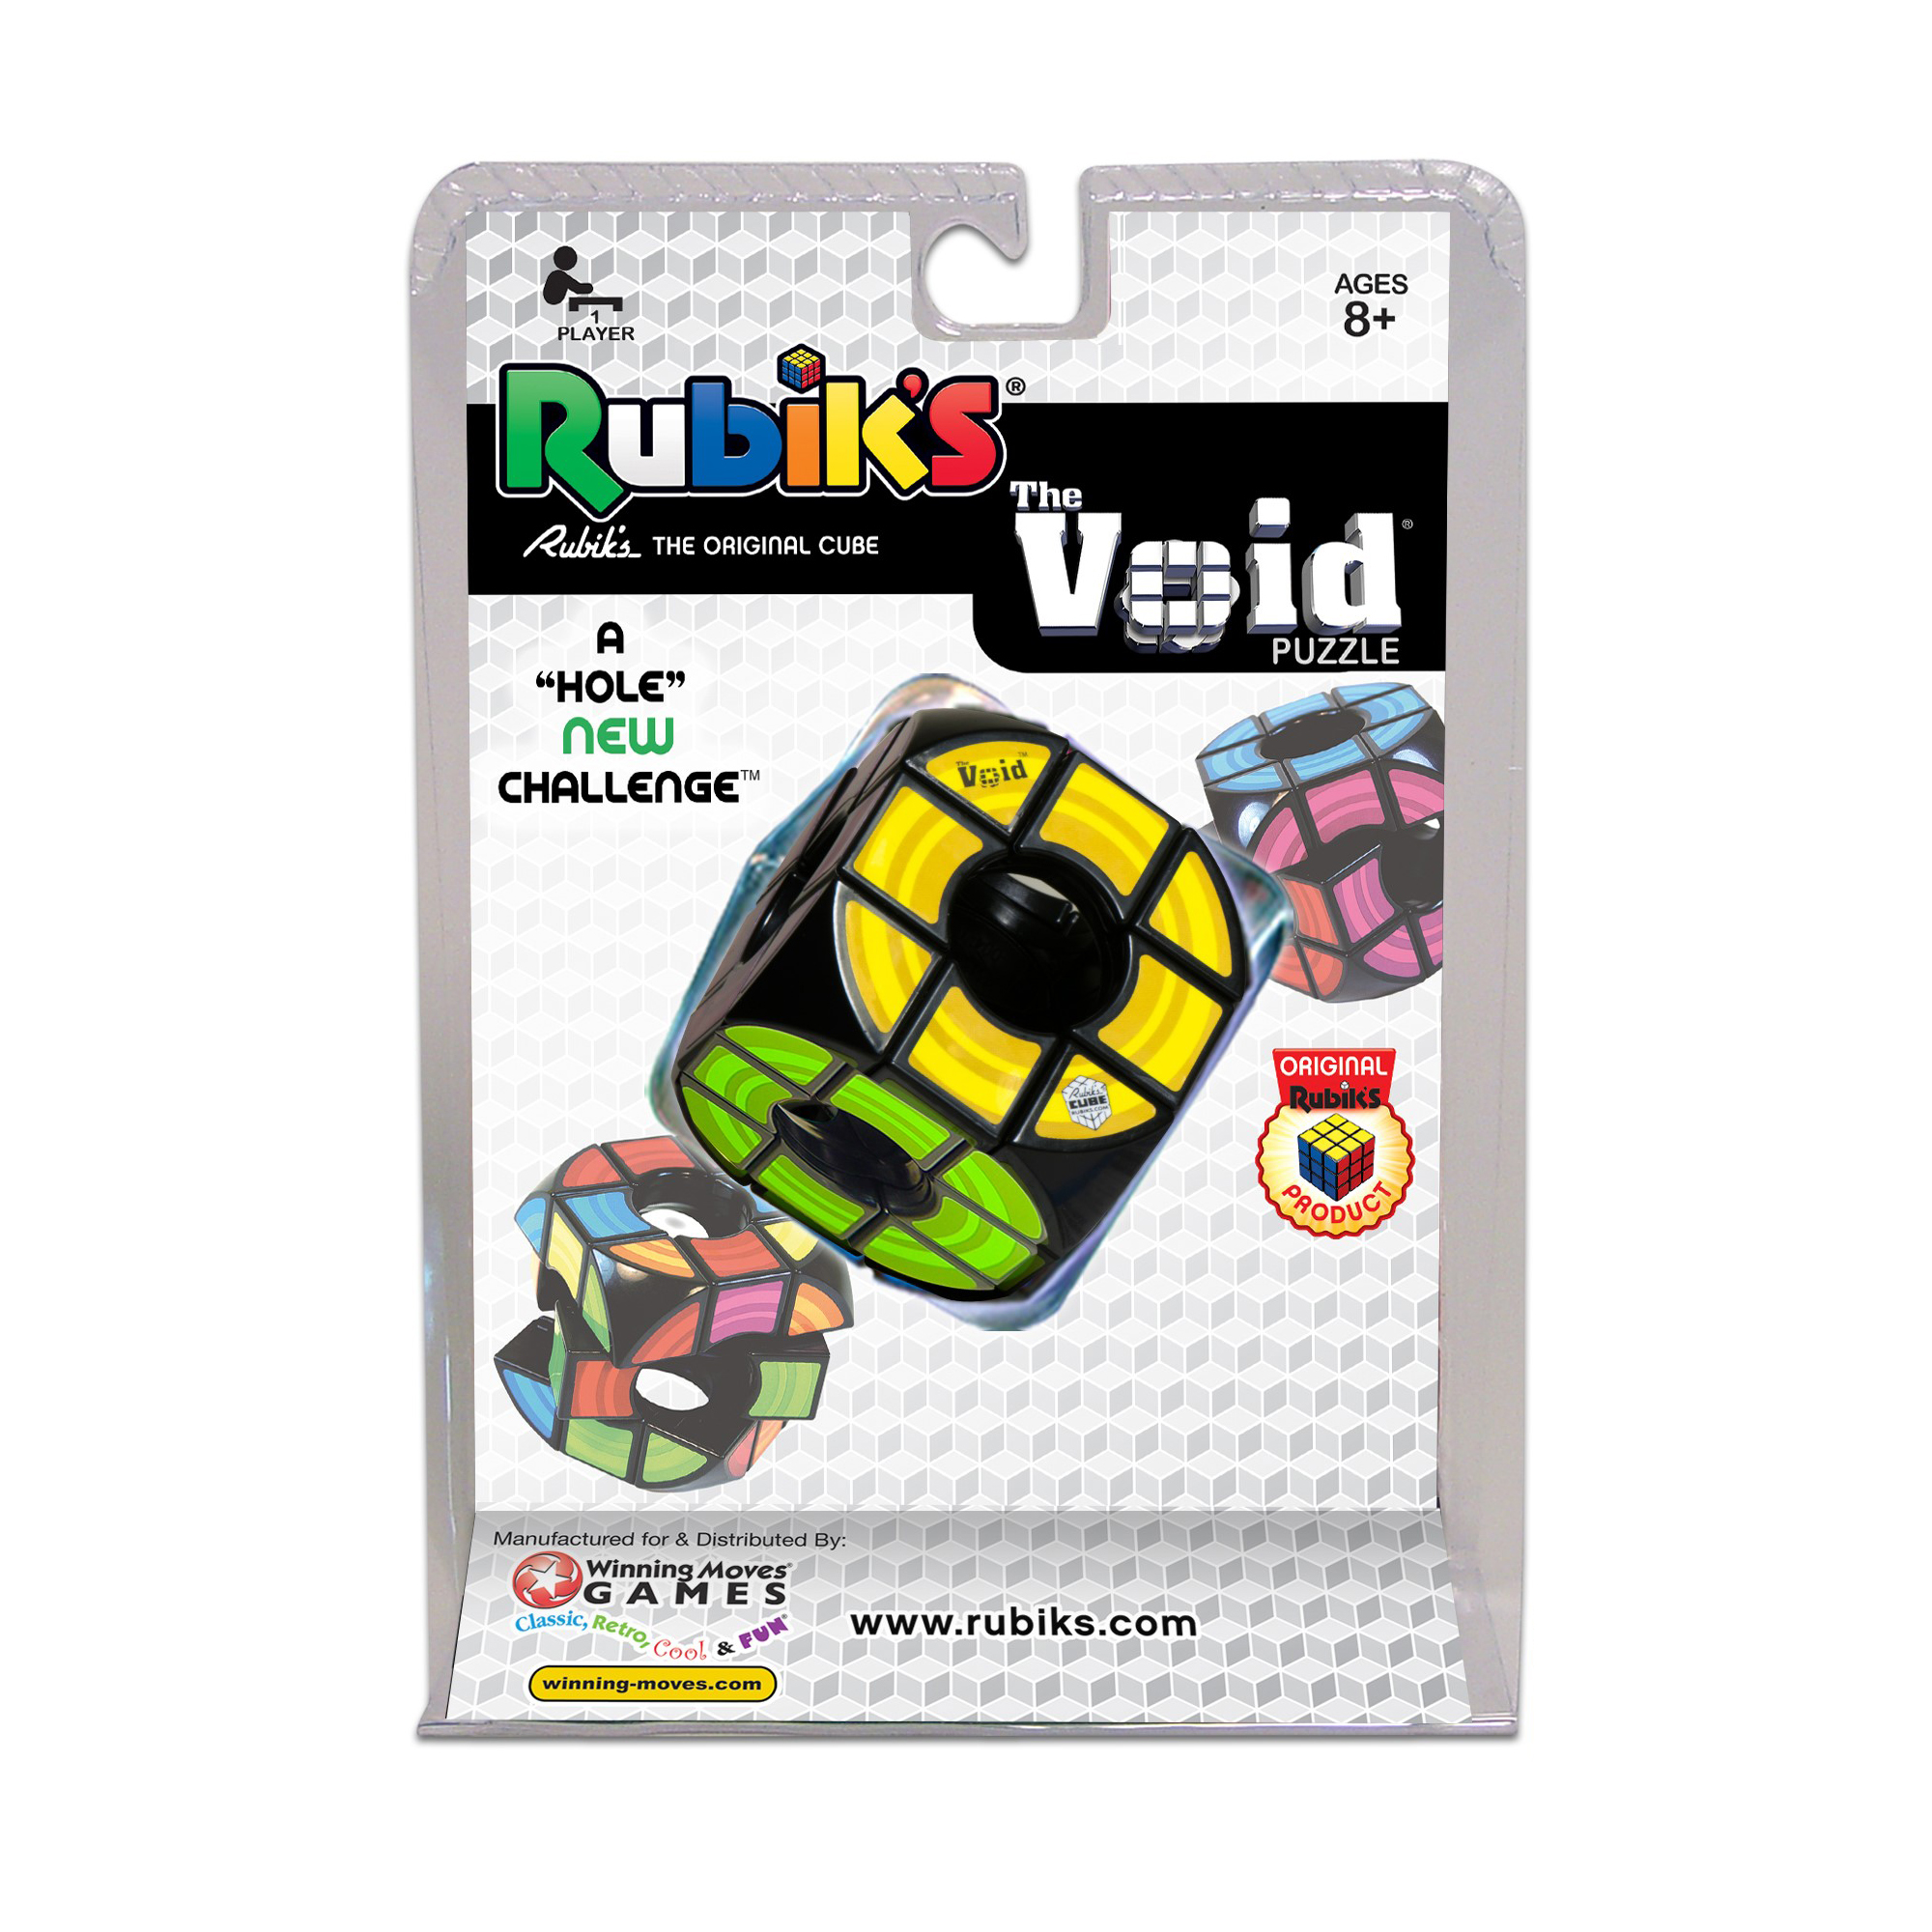 Winning Moves Games Rubik's The Void Puzzle